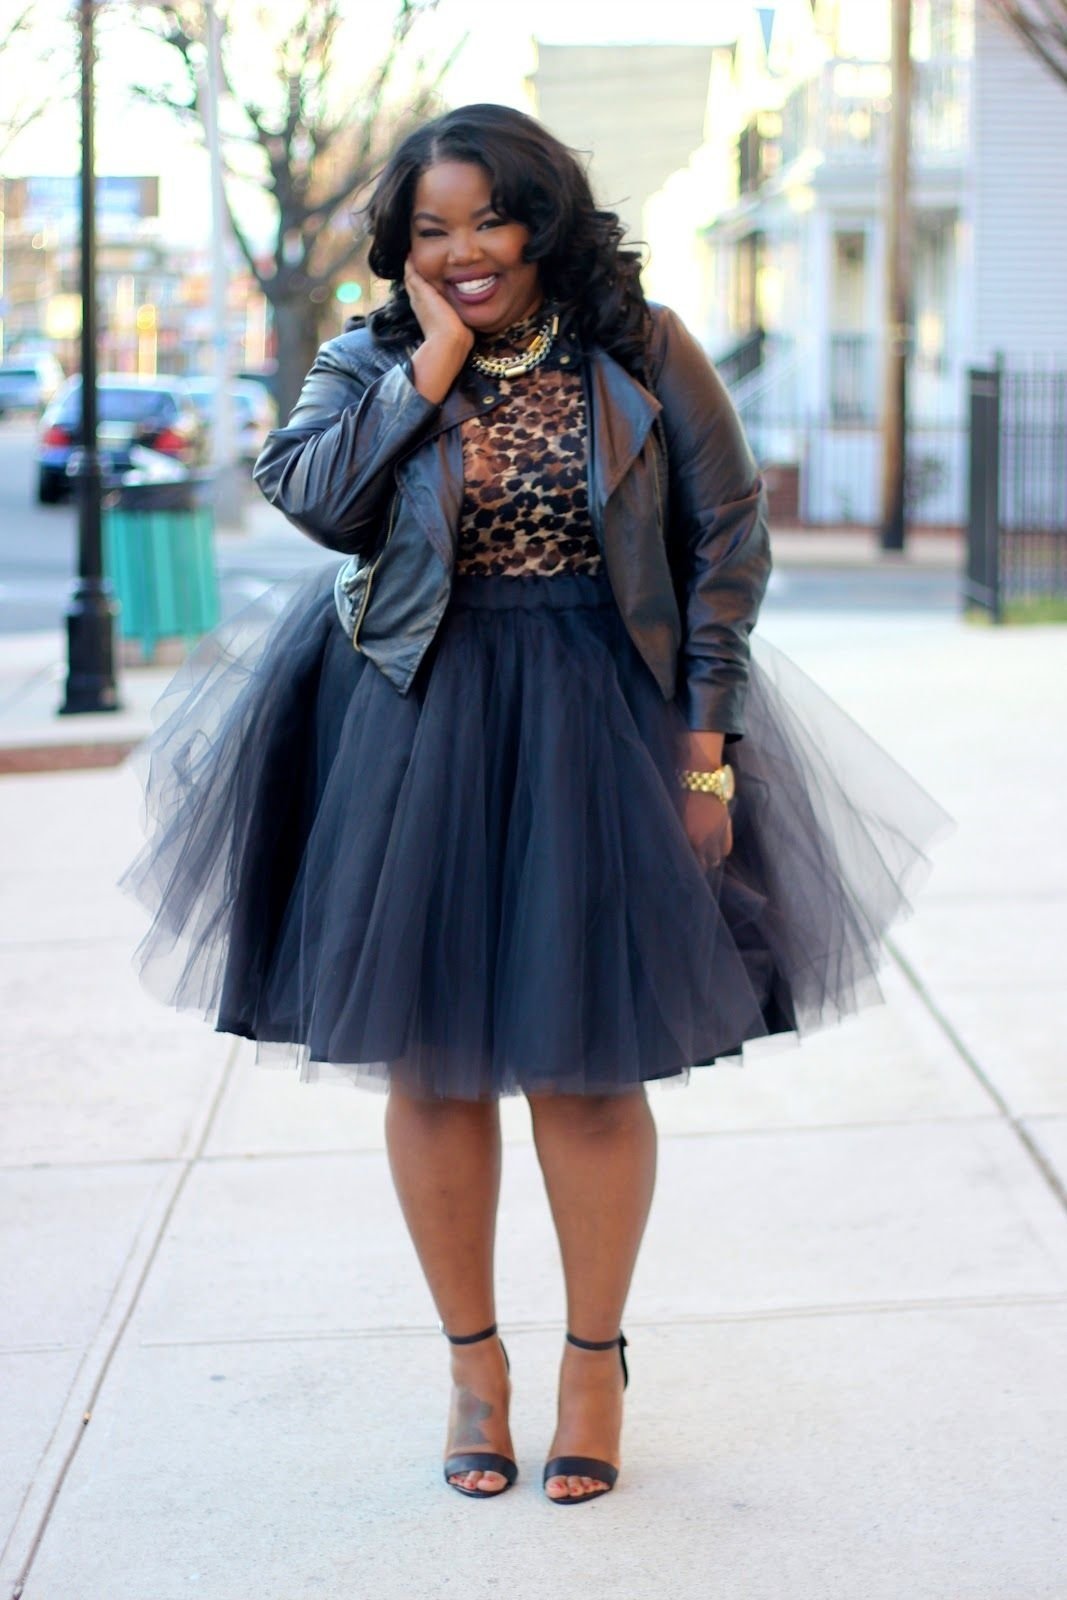 10 Unique Birthday Outfit Ideas For Women nye outfit ideas 2 girls night phat fashion bbw pinterest nye 2022